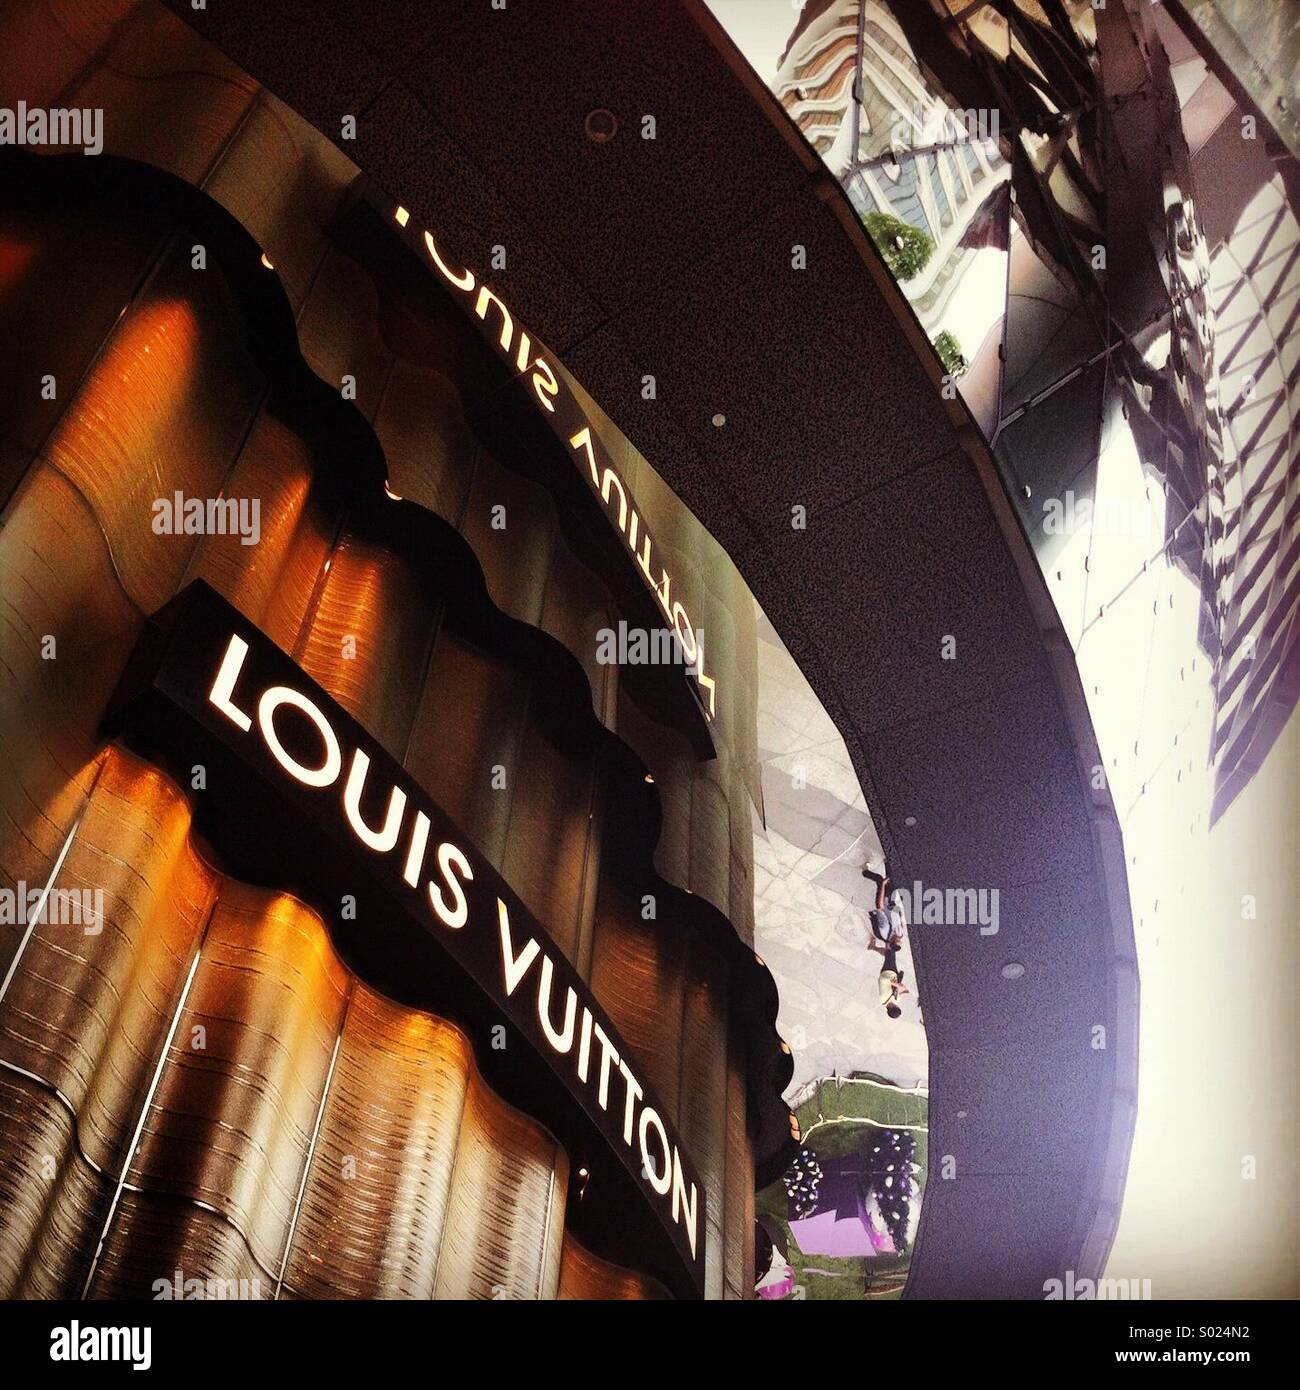 Louis vuitton store singapore hi-res stock photography and images - Alamy